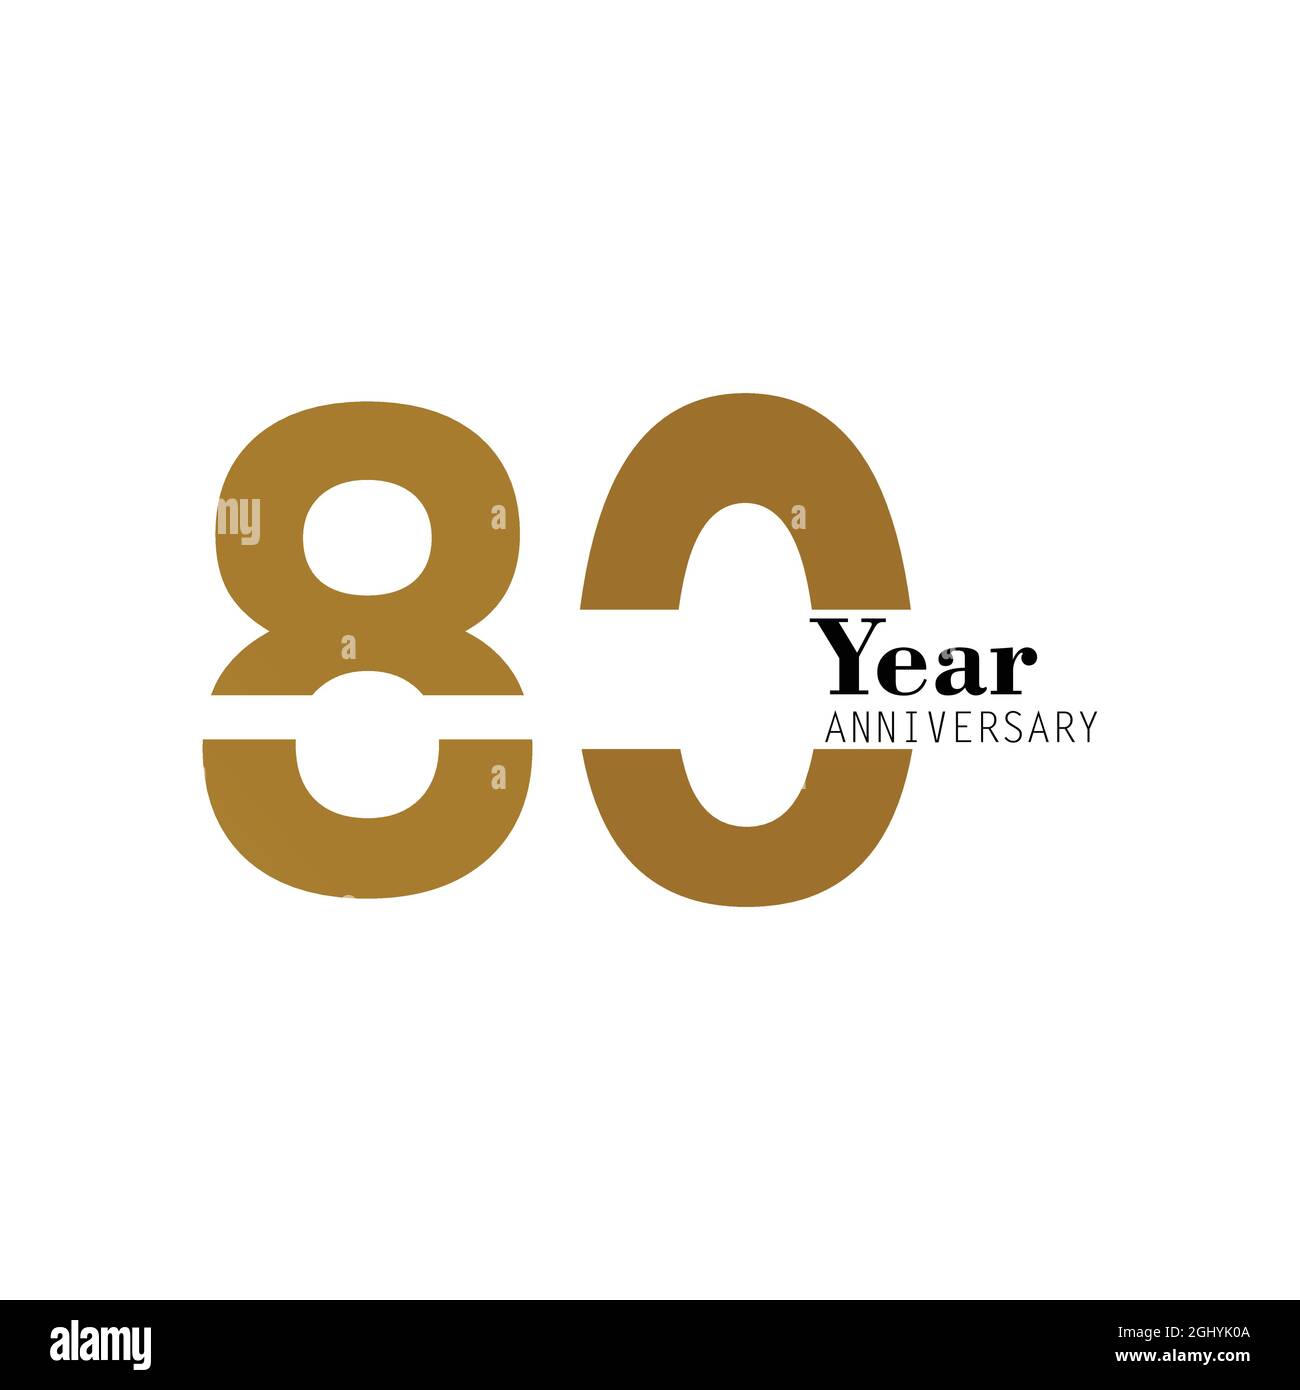 80 Year Anniversary Logo Vector Template Design Illustration Gold And